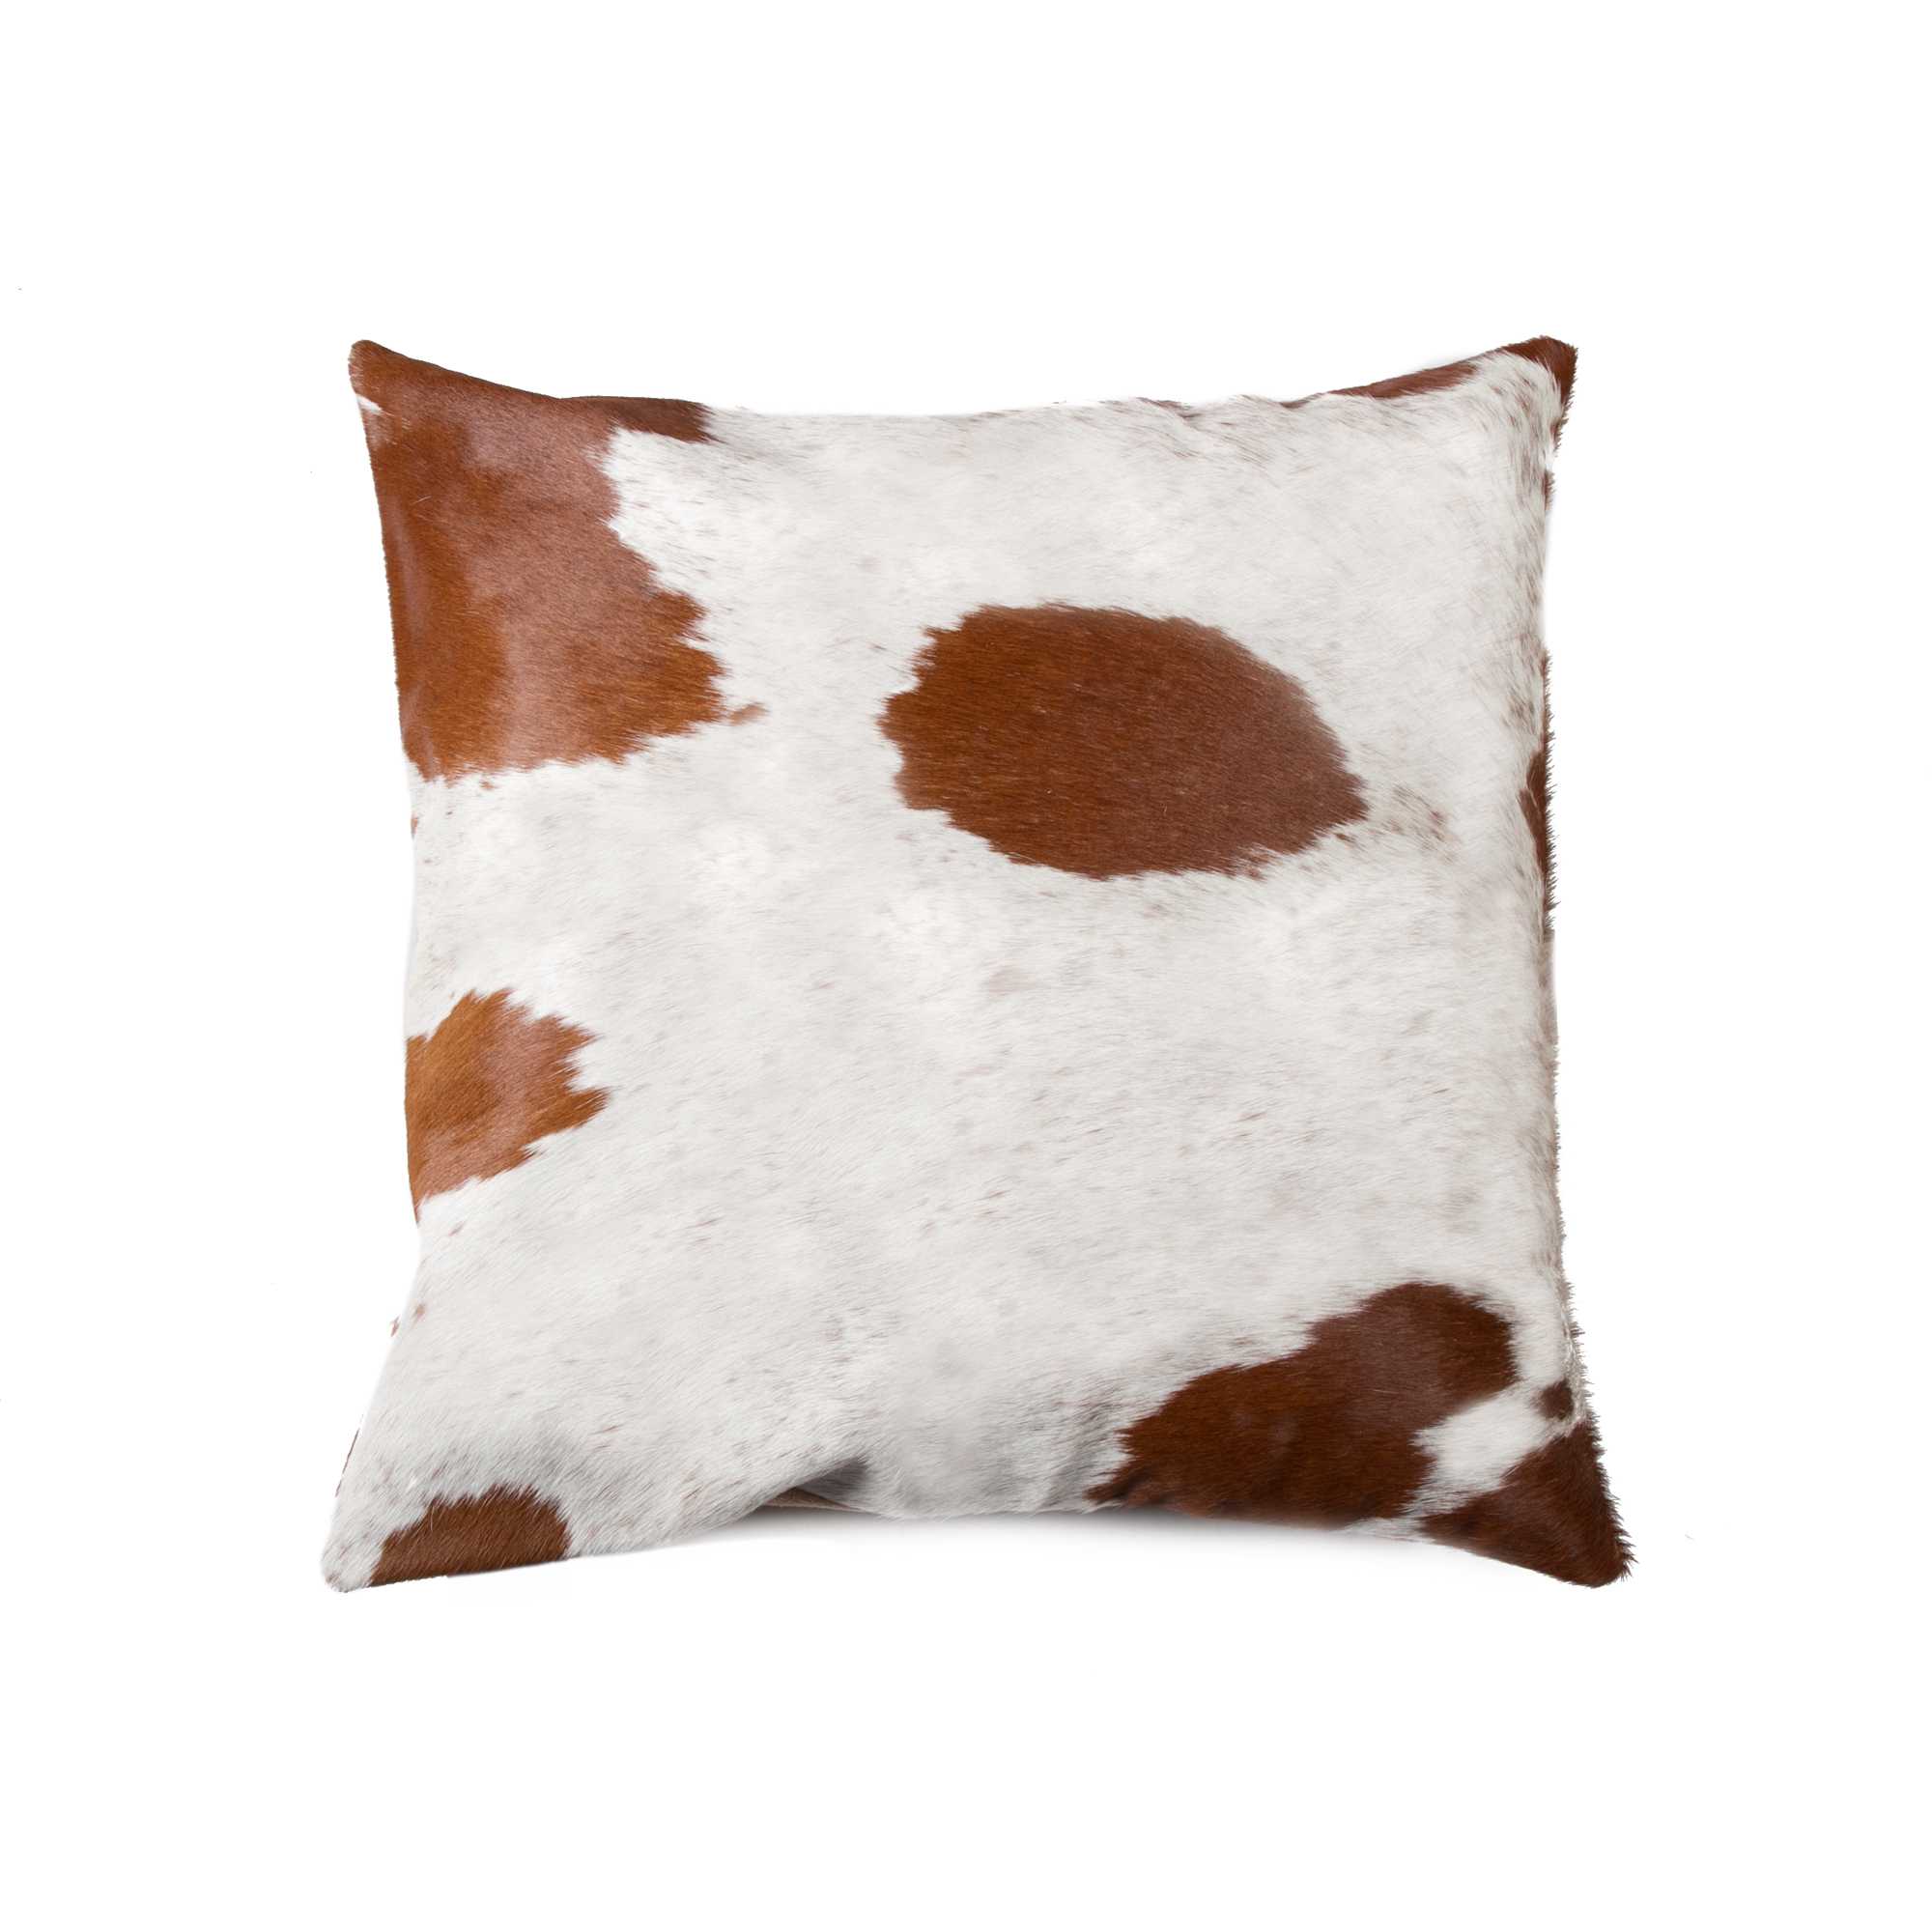 18" x 18" x 5" White And Brown Cowhide - Pillow